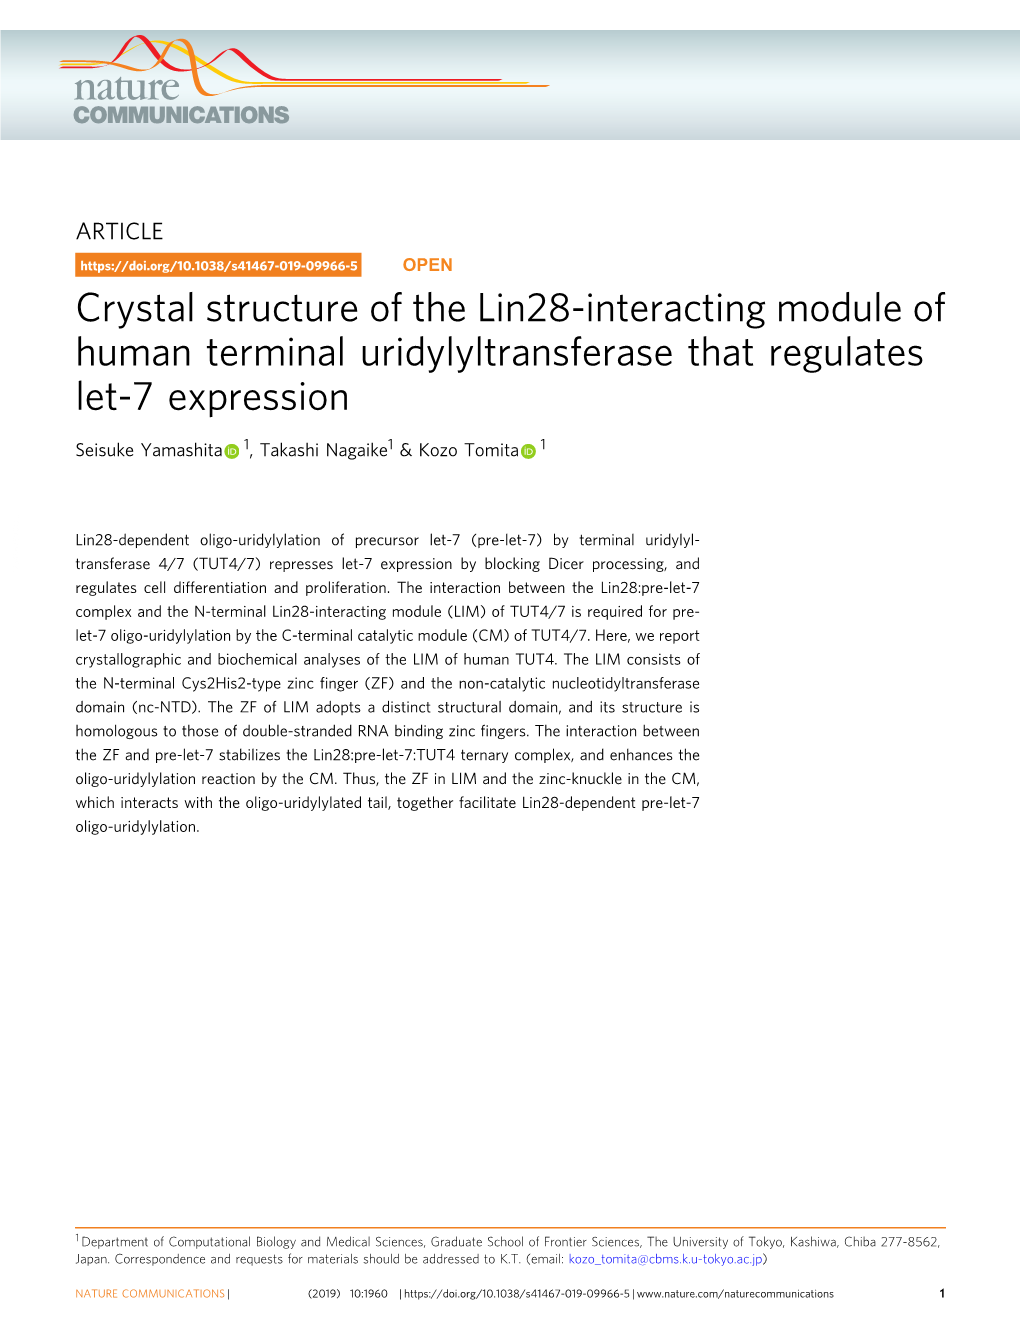 Crystal Structure of the Lin28-Interacting Module of Human Terminal Uridylyltransferase That Regulates Let-7 Expression